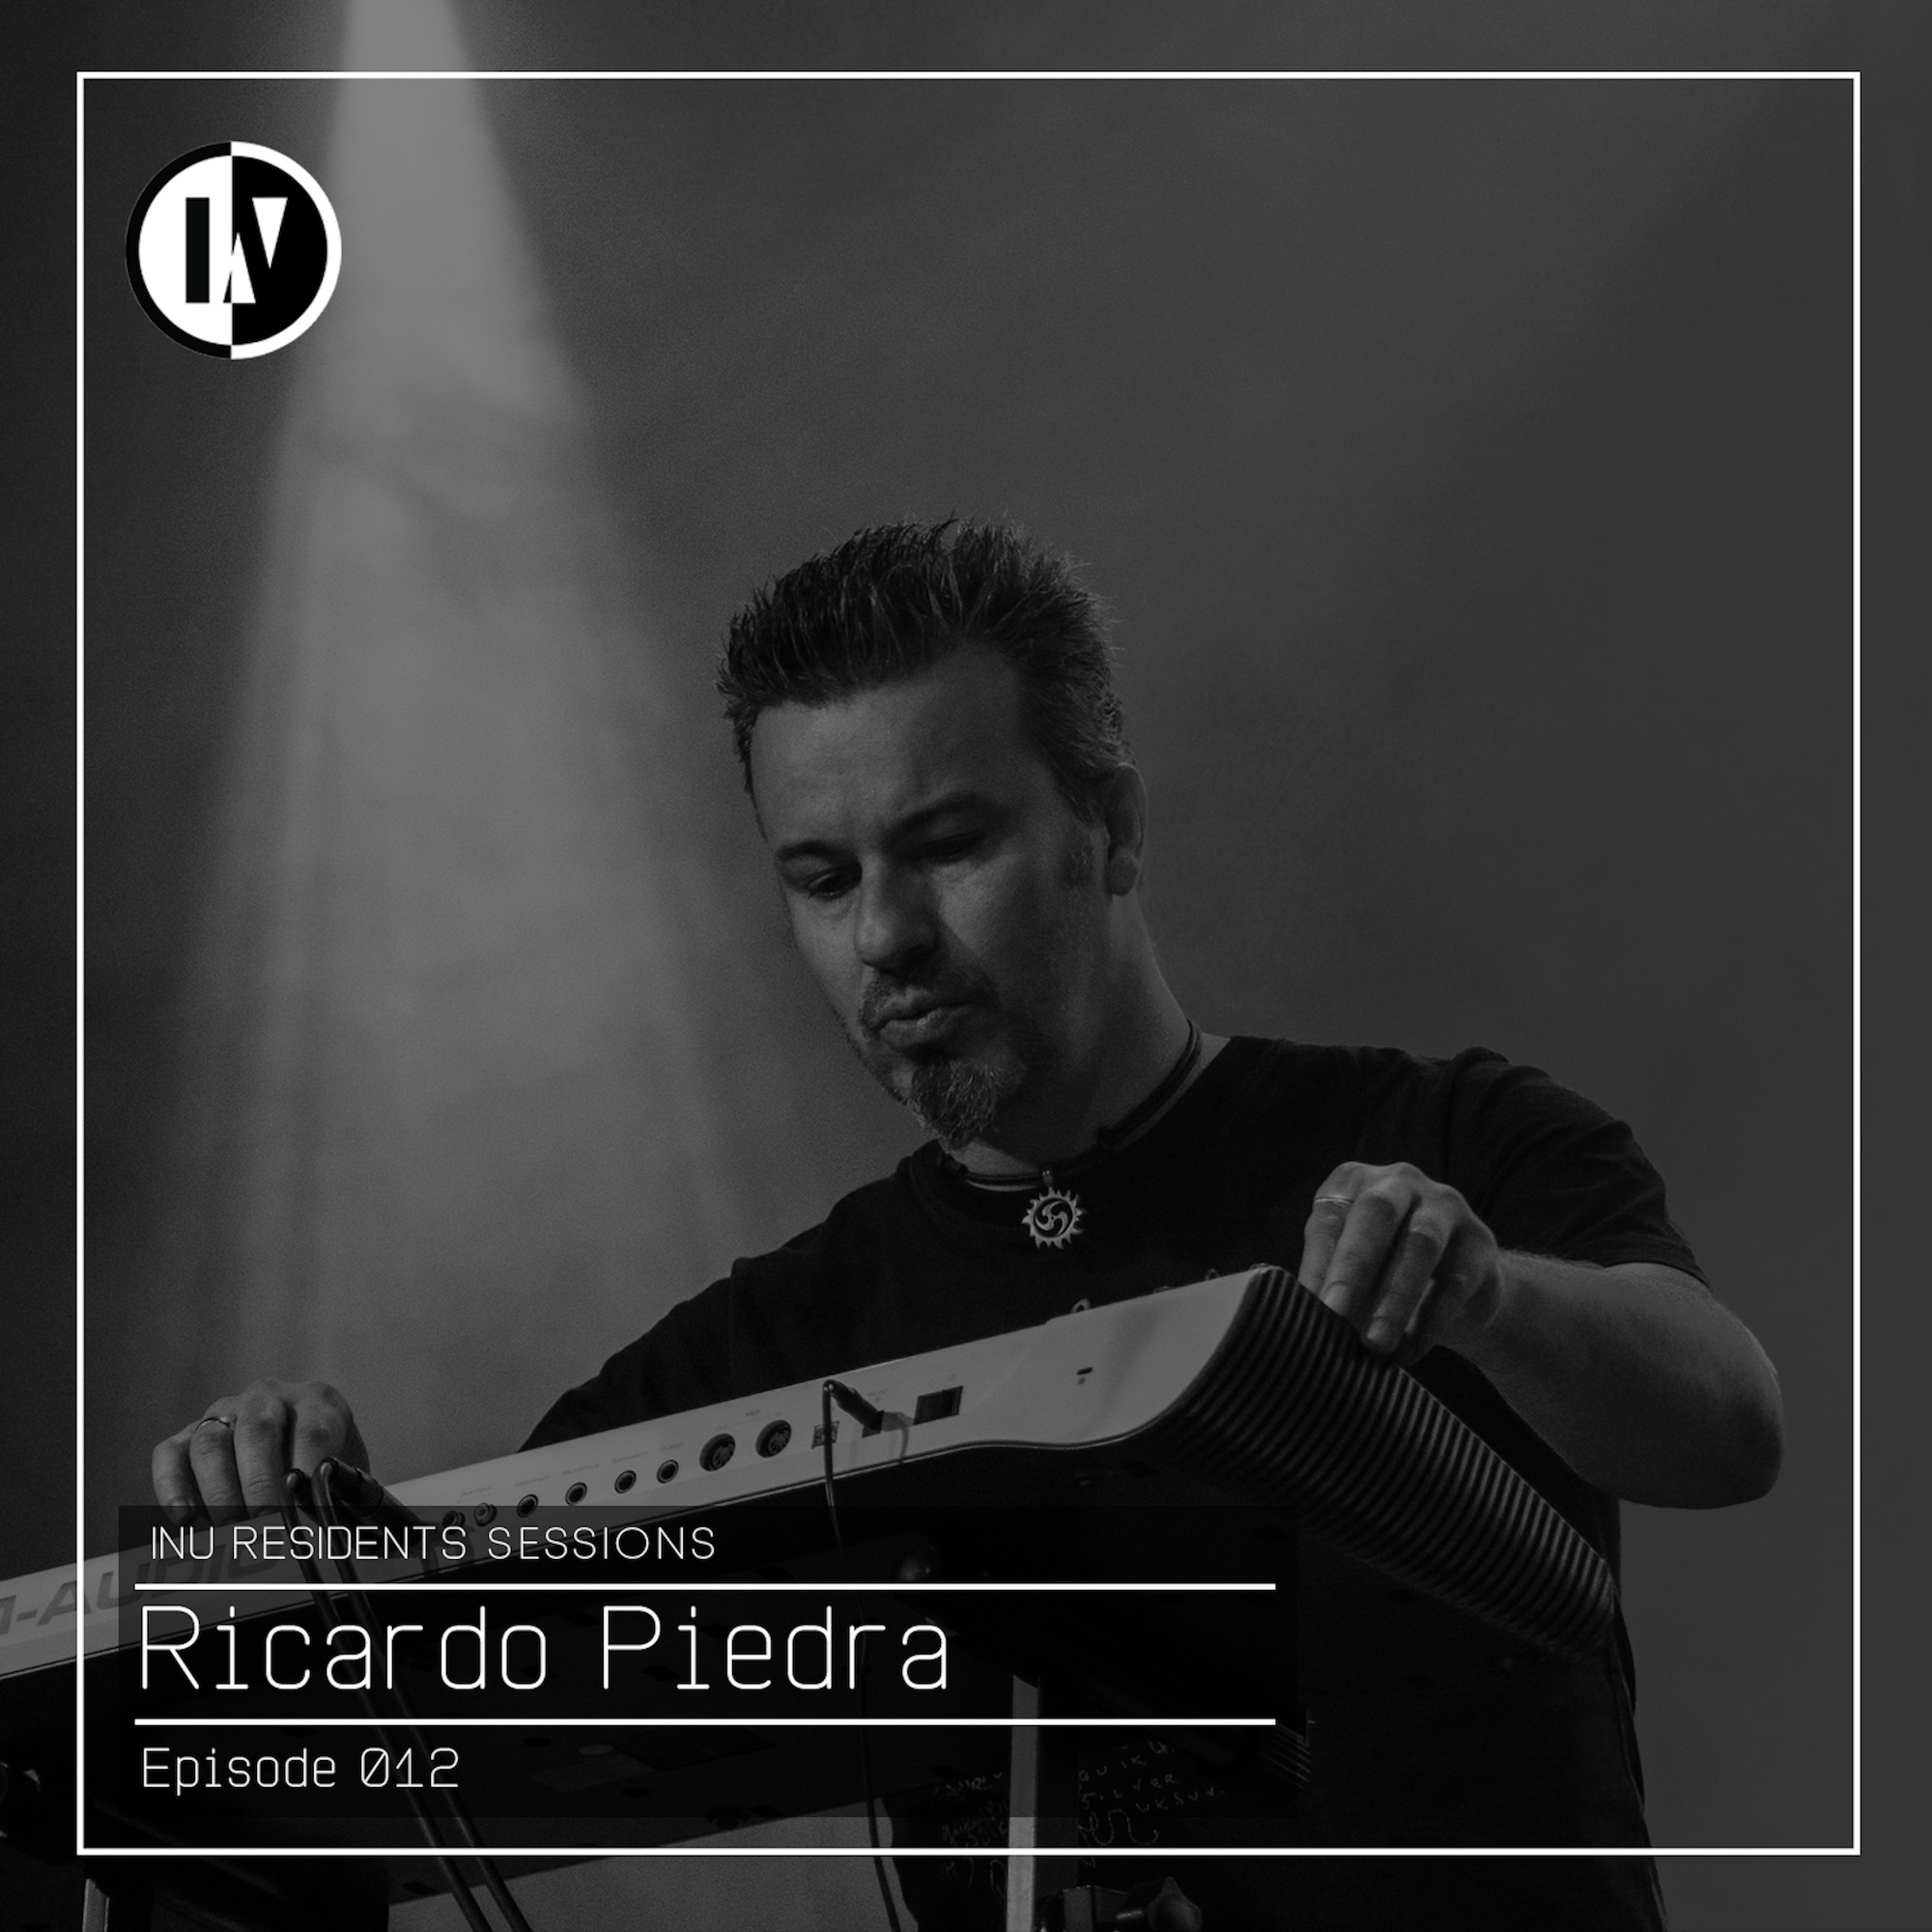 INU Residents Sessions 012 - Ricardo Piedra (from August 30th, 2020)